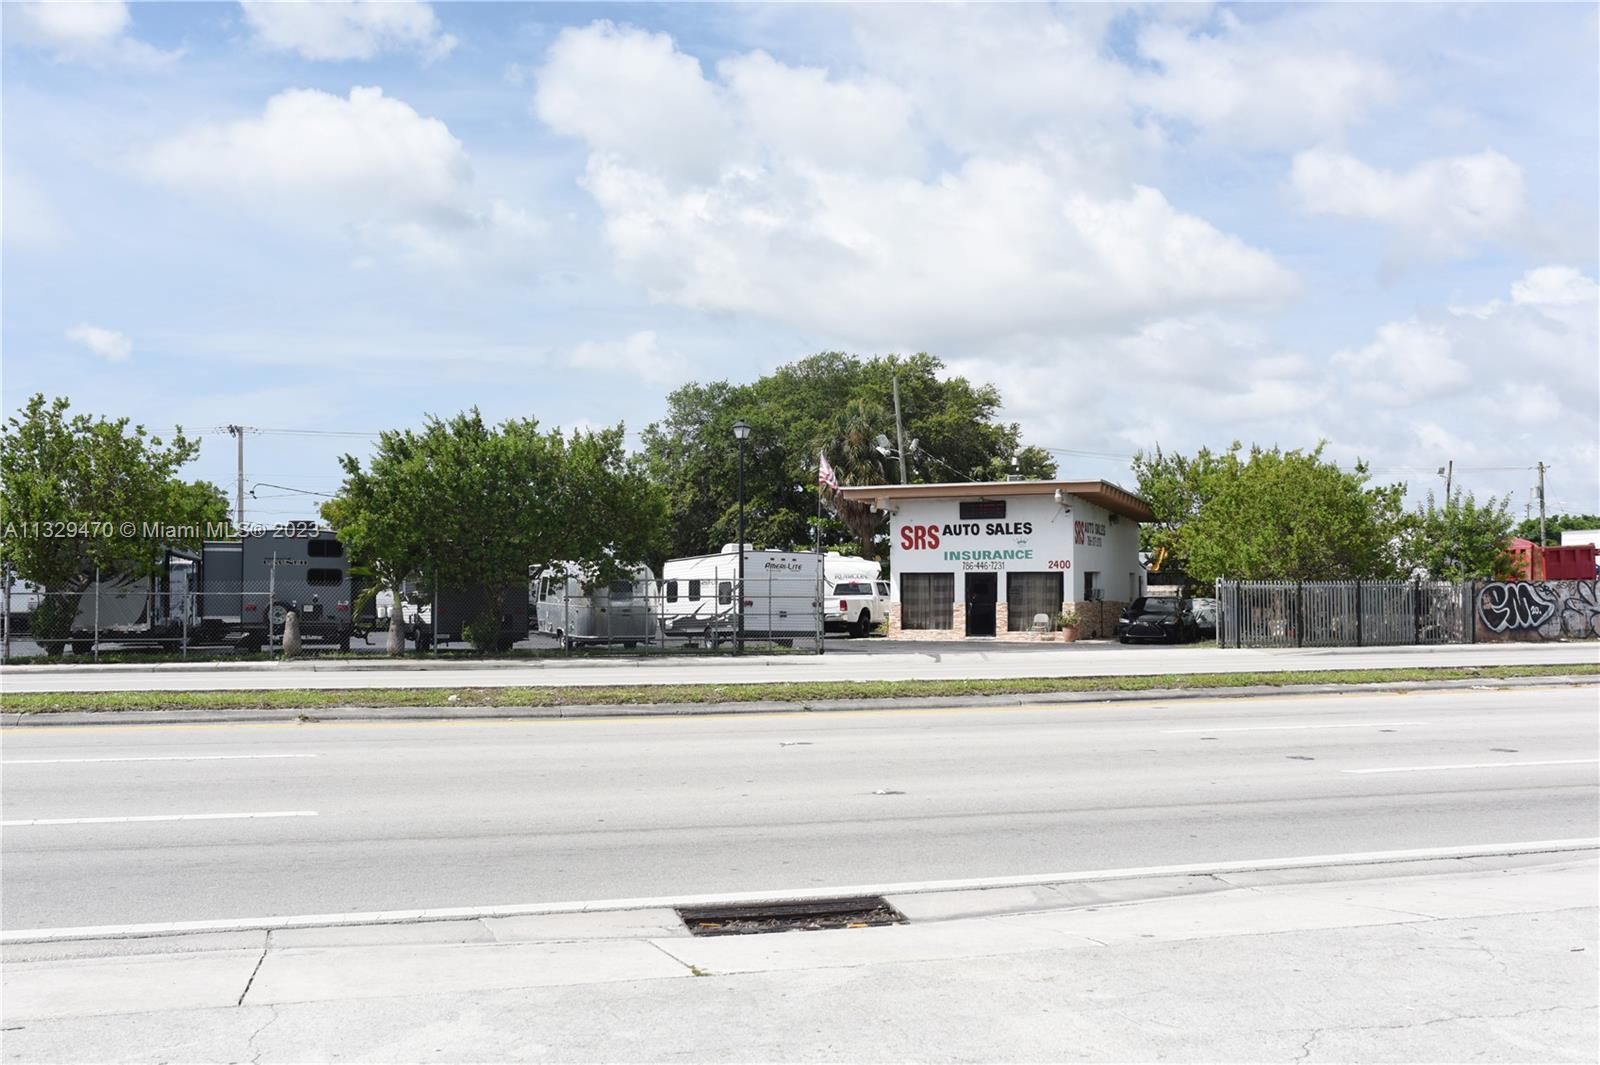 Photo of 2400 NW 79th St in Miami, FL